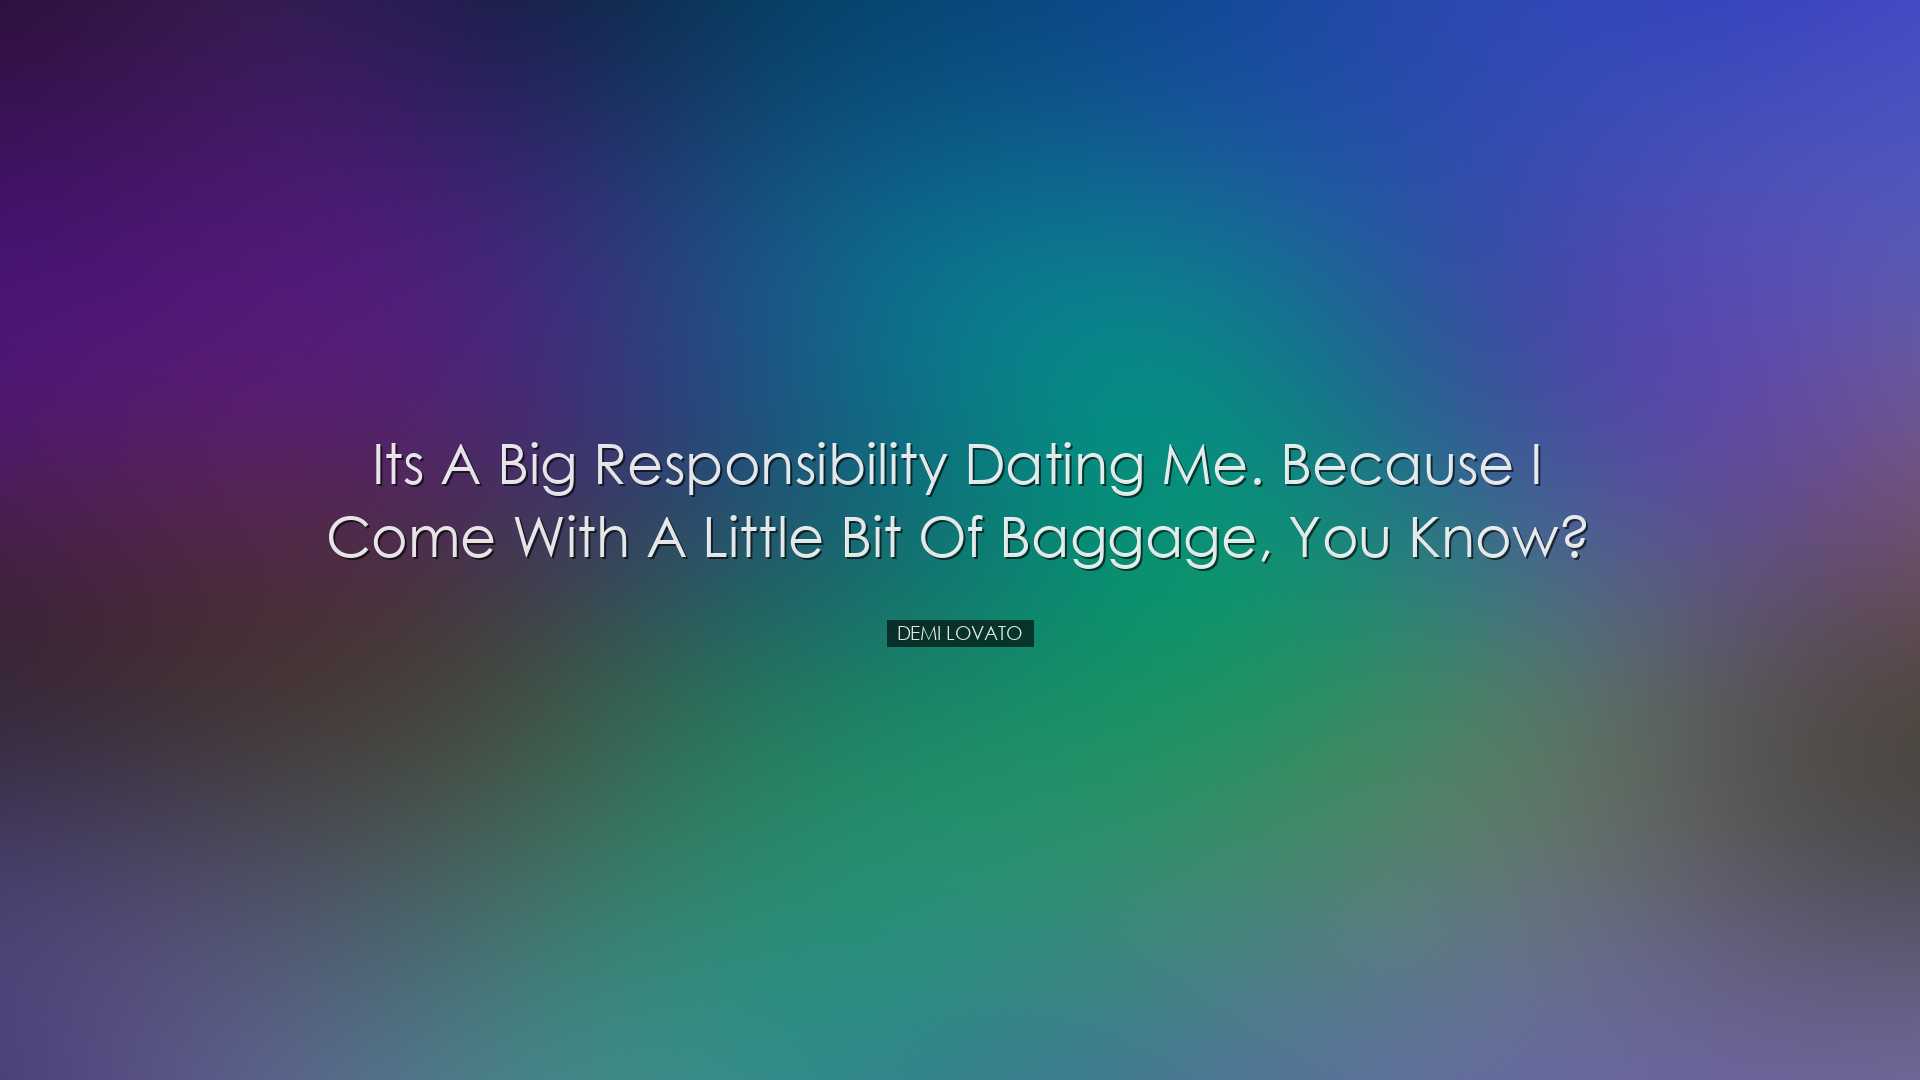 Its a big responsibility dating me. Because I come with a little b